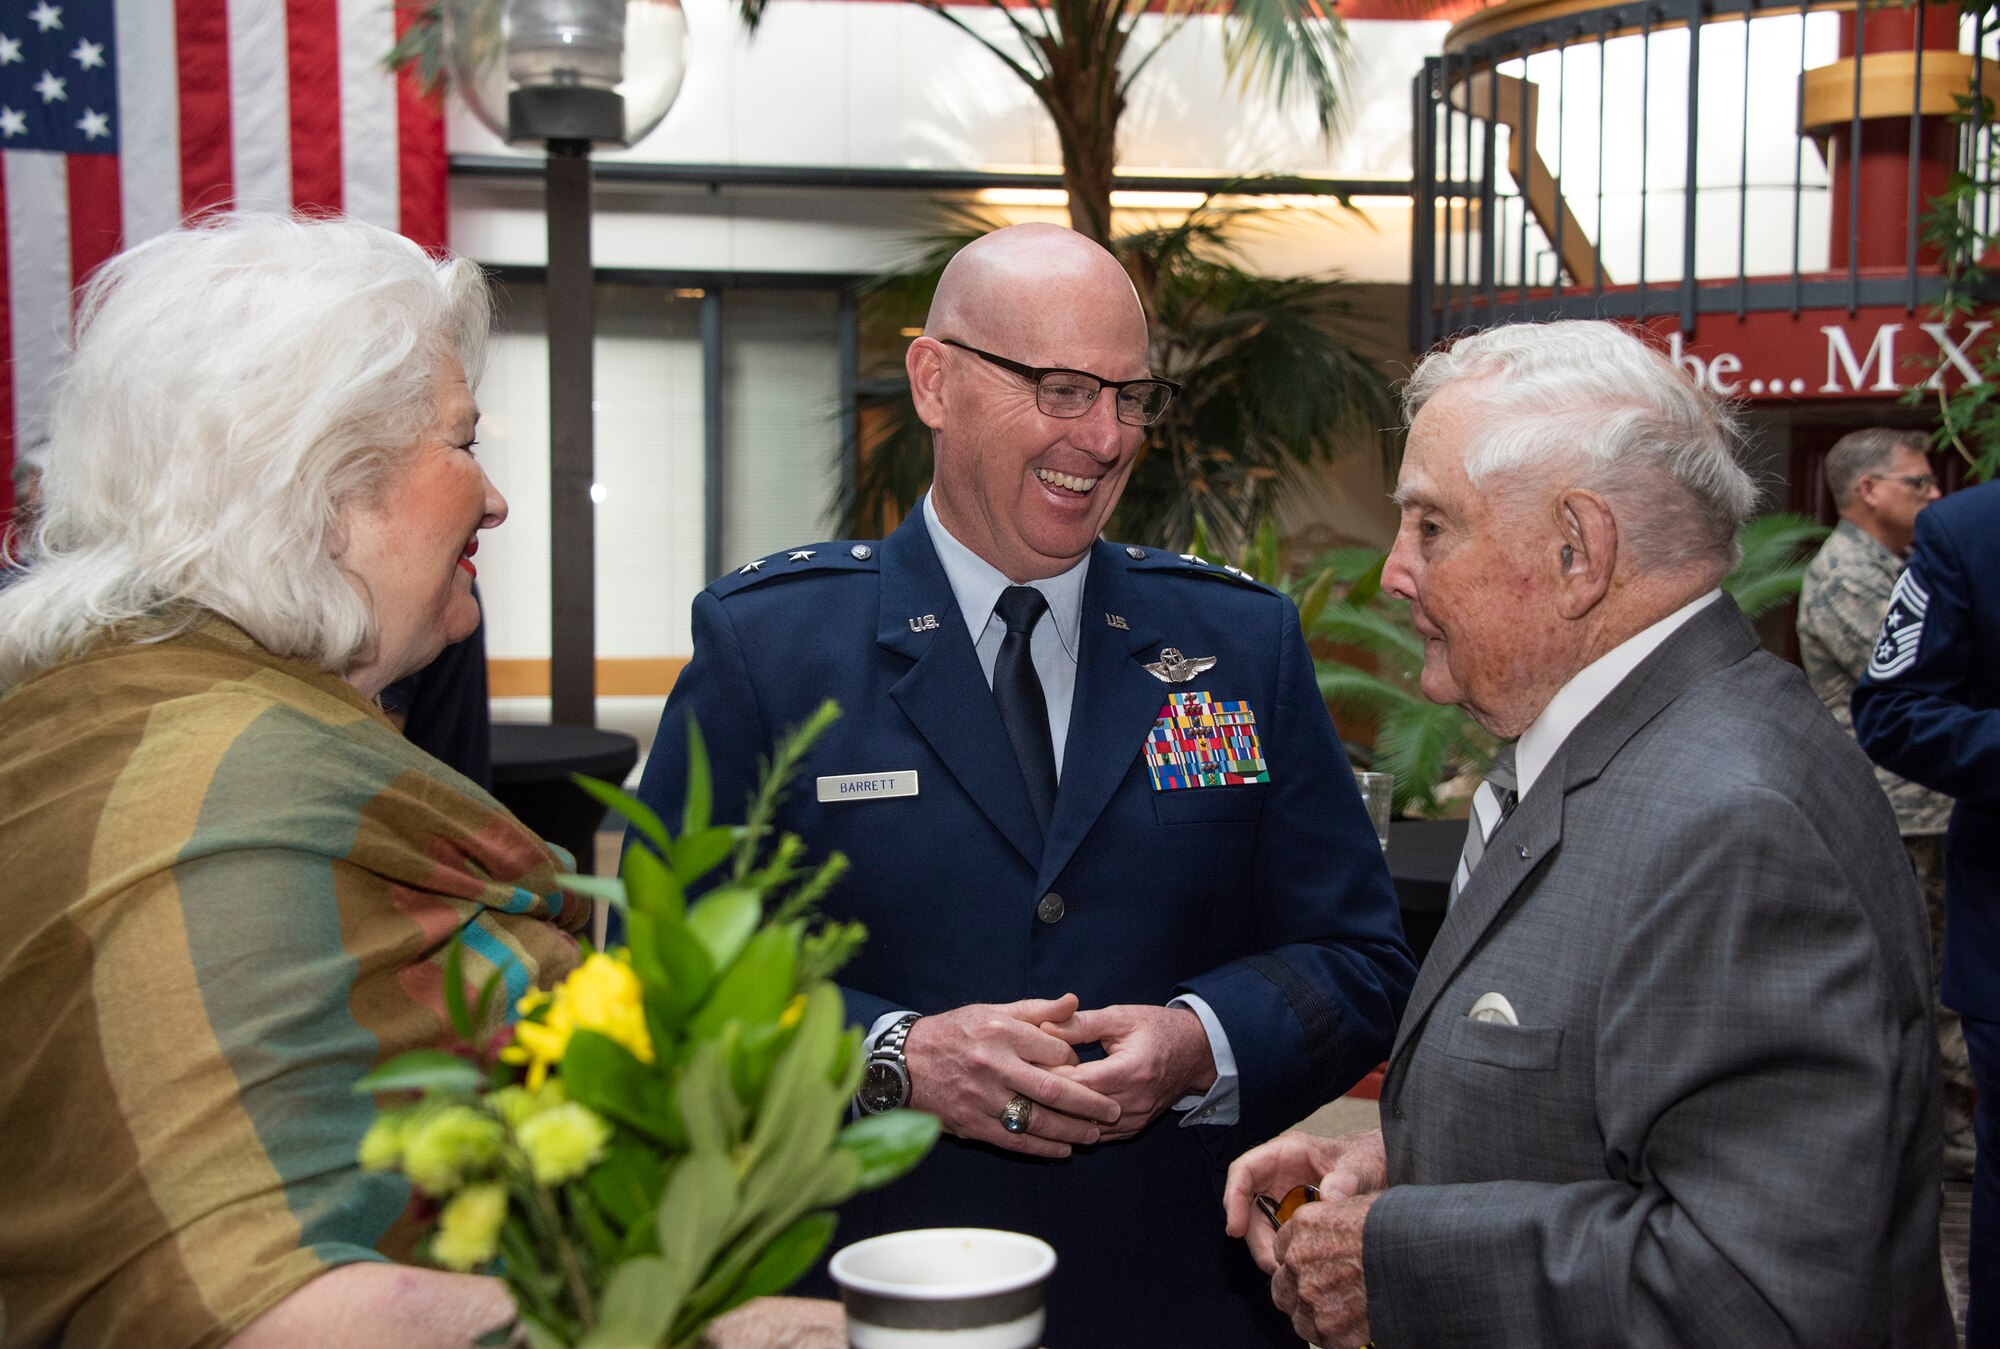 Maj. Gen. Sam Barrett, 18th Air Force commander, speaks with retired Lt. Gen. John Gonge, prior to an assumption of command ceremony at Travis Air Force Base, Calif., Sept. 18, 2018. Gonge commanded the 22nd Air Force at Travis from August 1972 to August 1975. (U.S. Air Force photo by Heide Couch)